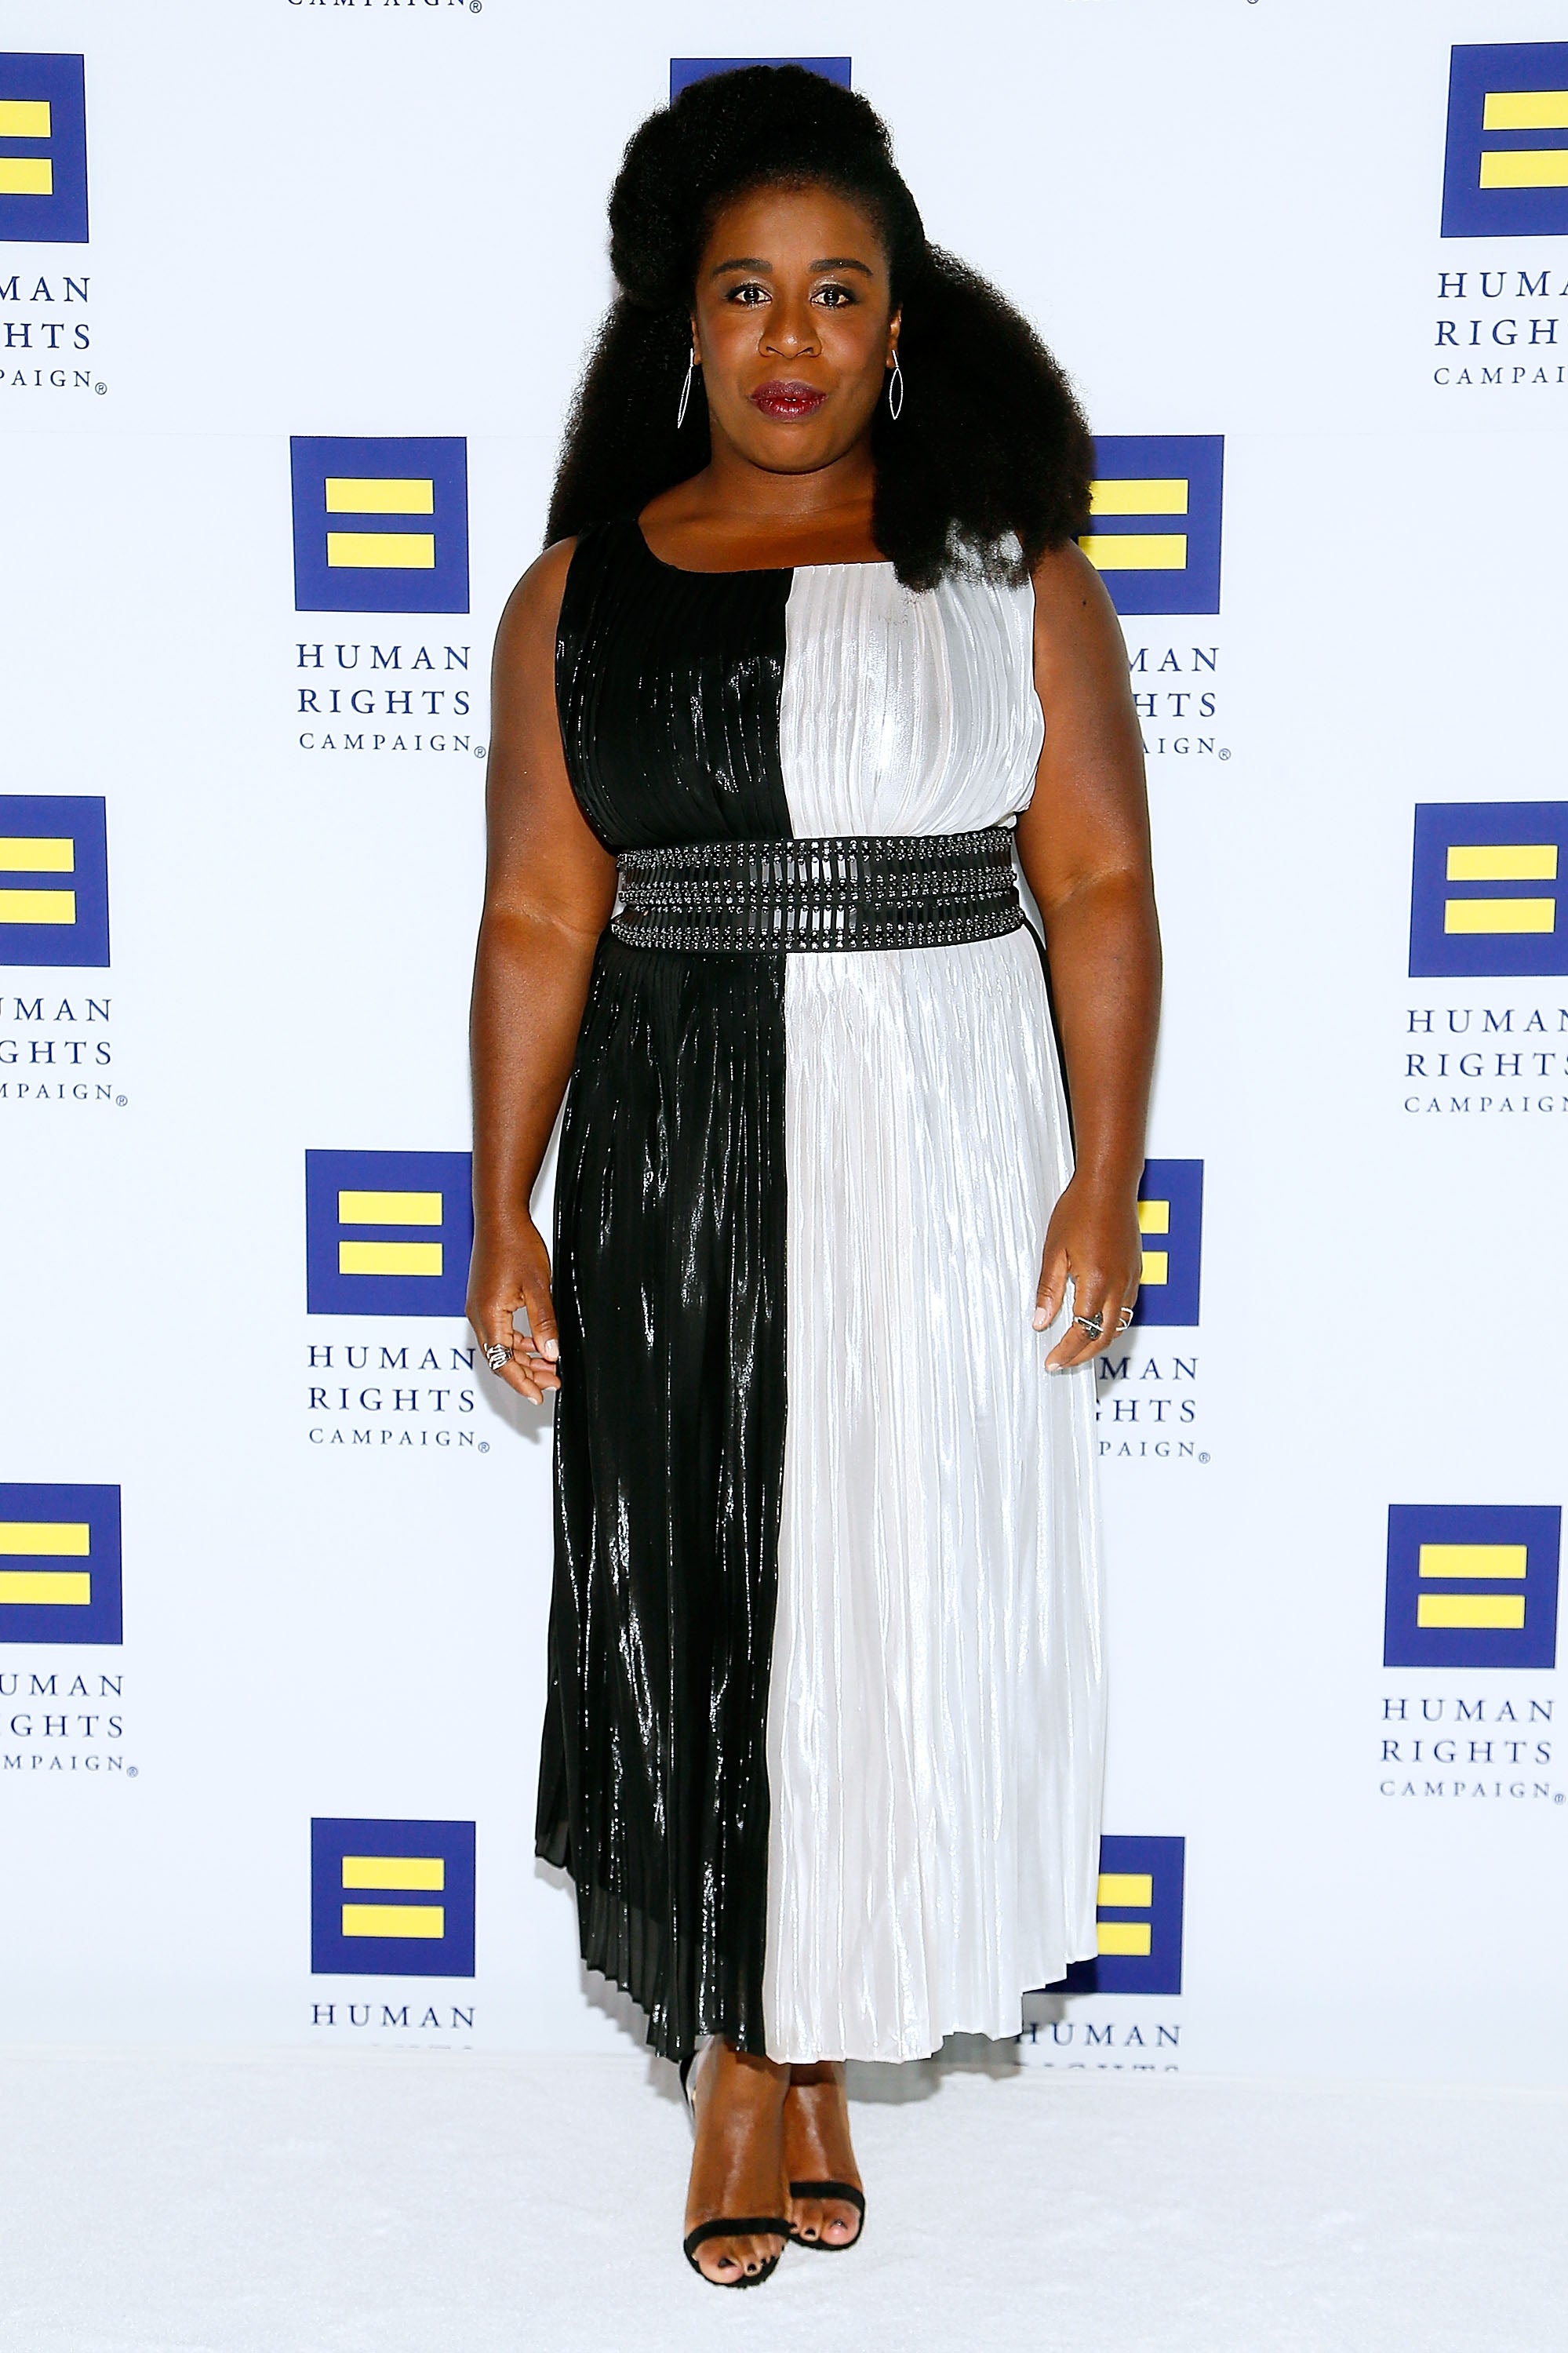 Oprah Winfrey, Janet Jackson, Michelle Obama and More Celebs Out and About
